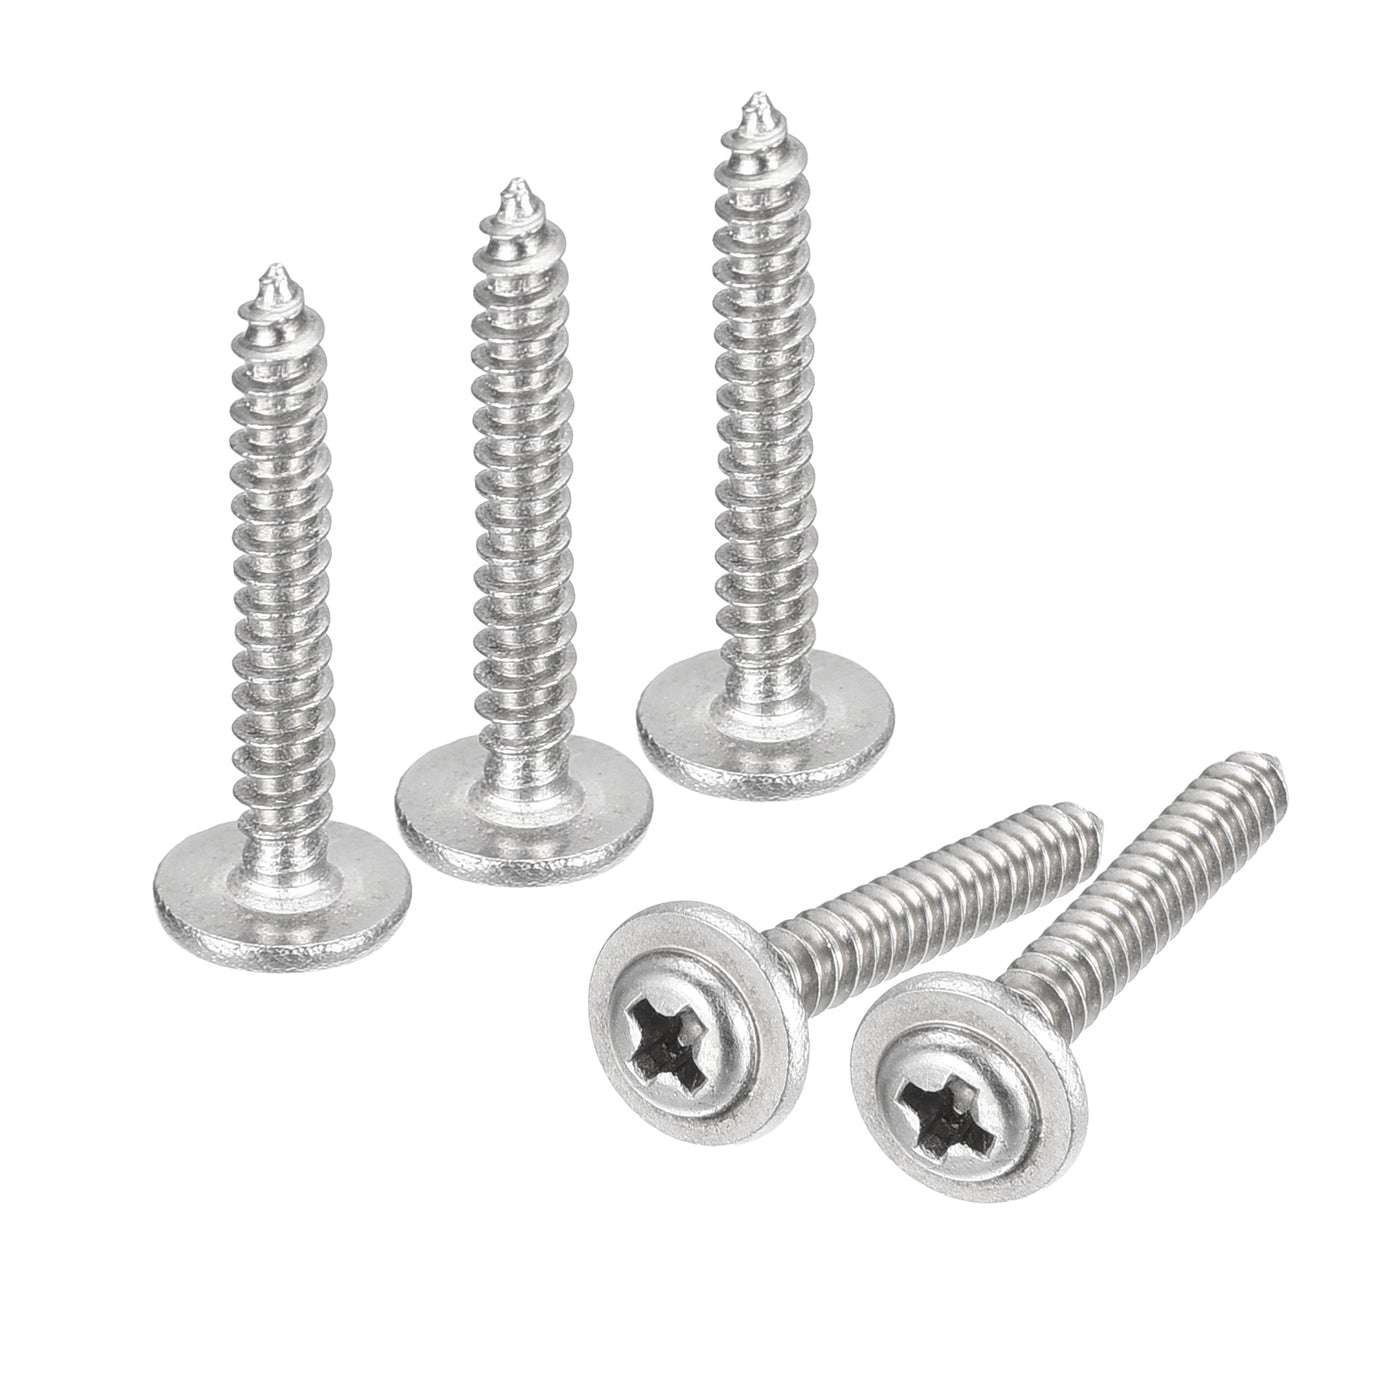 uxcell Uxcell ST2.6x16mm Phillips Pan Head Self-tapping Screw with Washer, 100pcs - 304 Stainless Steel Wood Screw Full Thread (Silver)